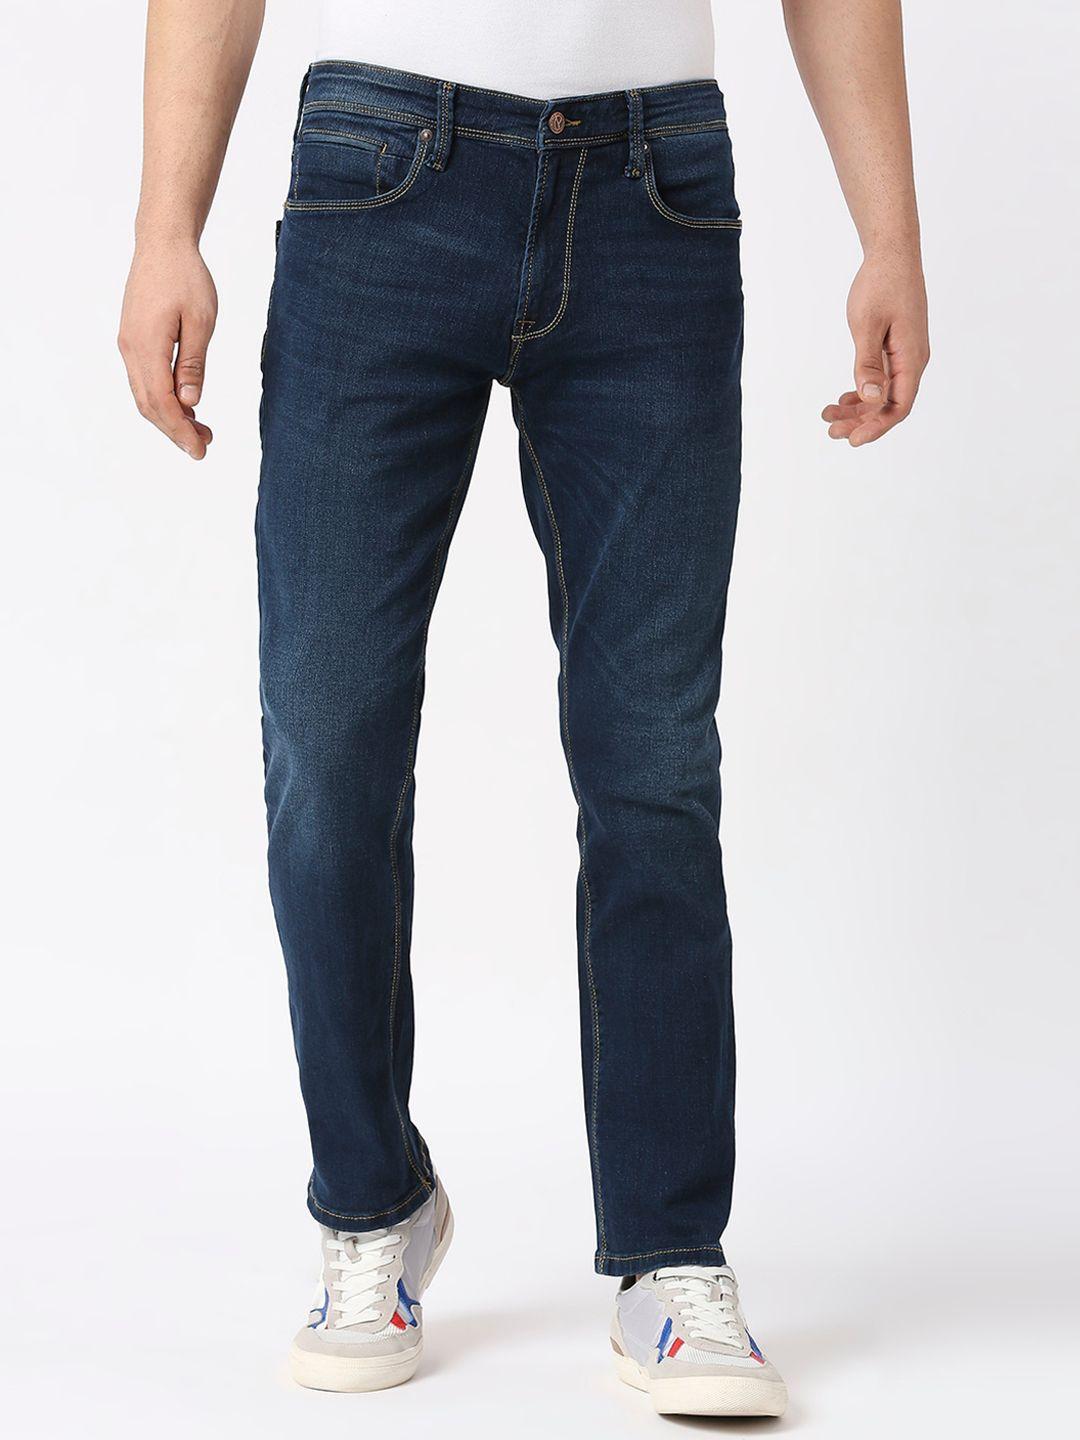 pepe-jeans-men-comfort-straight-fit-mid-rise-jeans